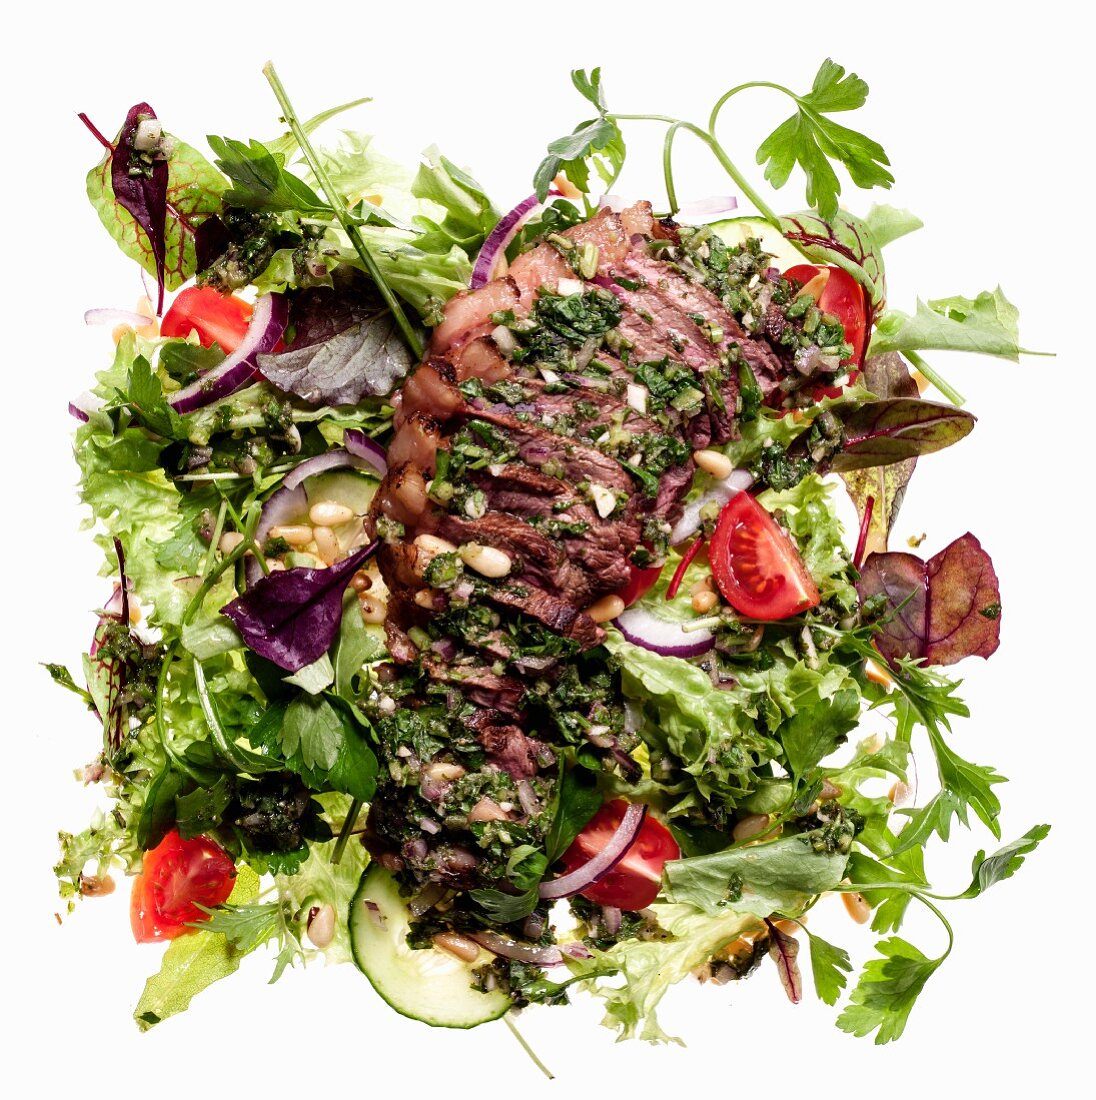 Mixed leaf salad with picanha steak and chimichurri sauce